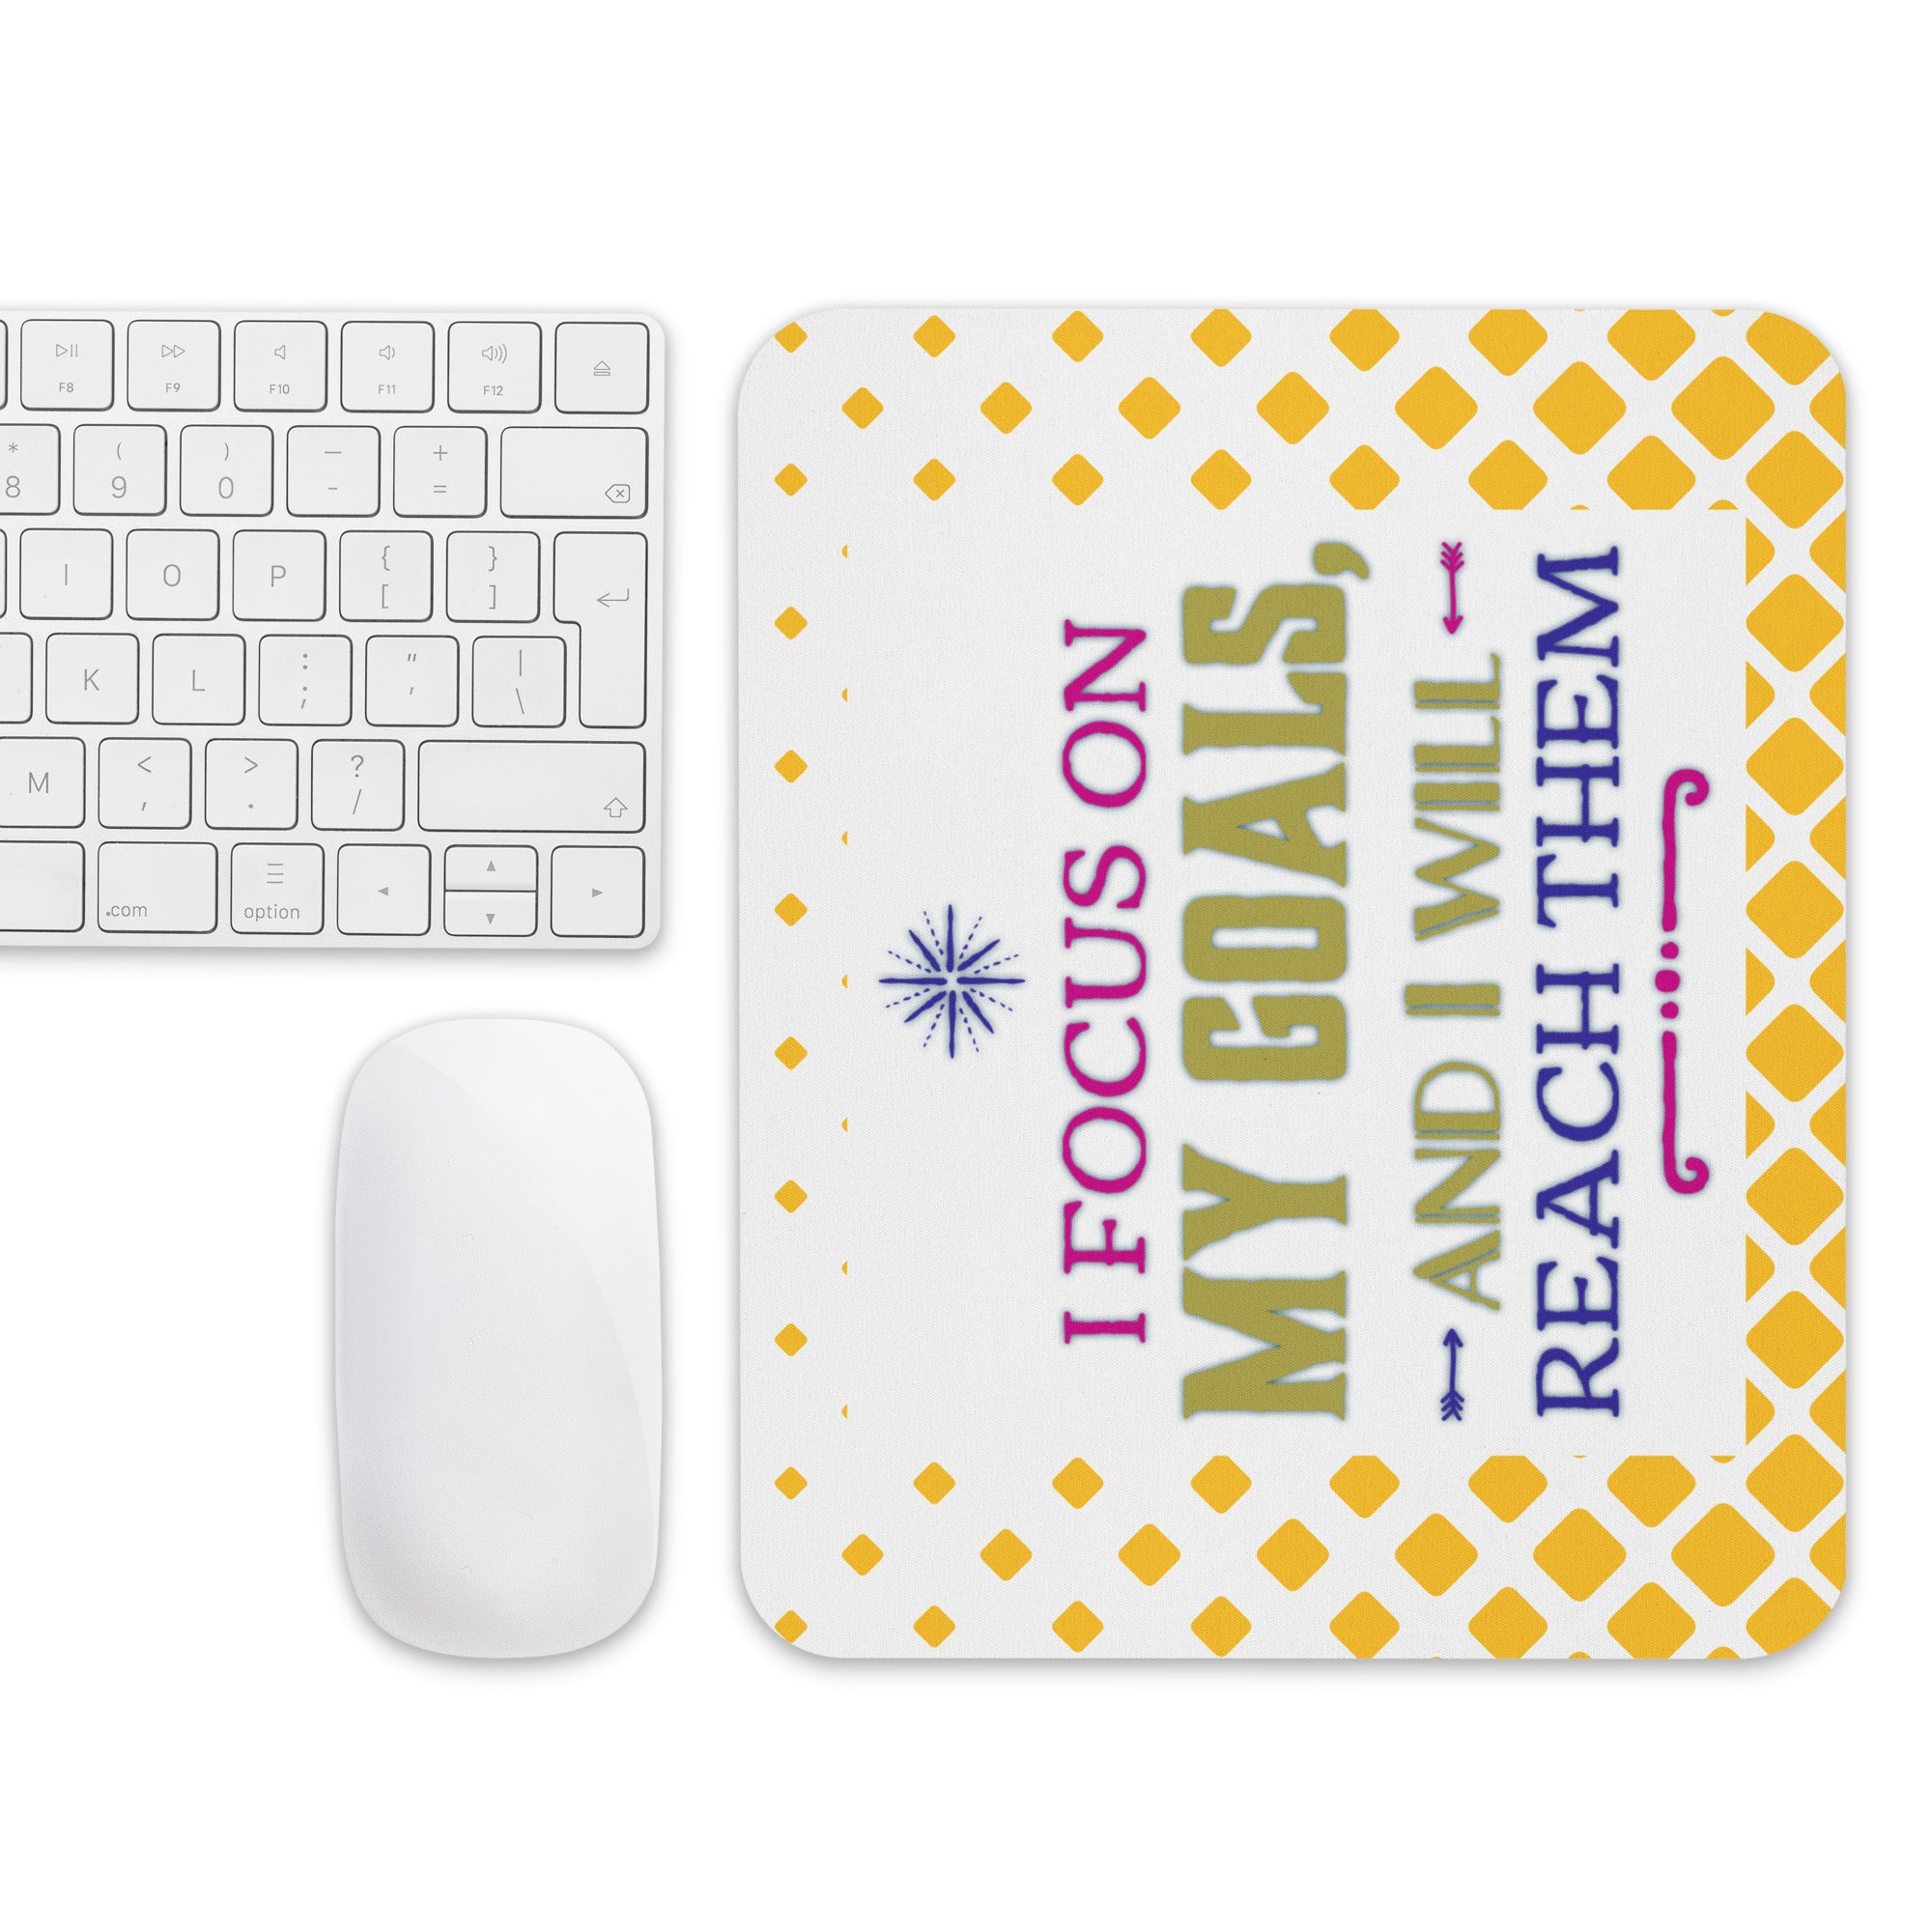 GloWell Designs - Mouse Pad - Affirmation Quote - I Focus On My Goals - GloWell Designs